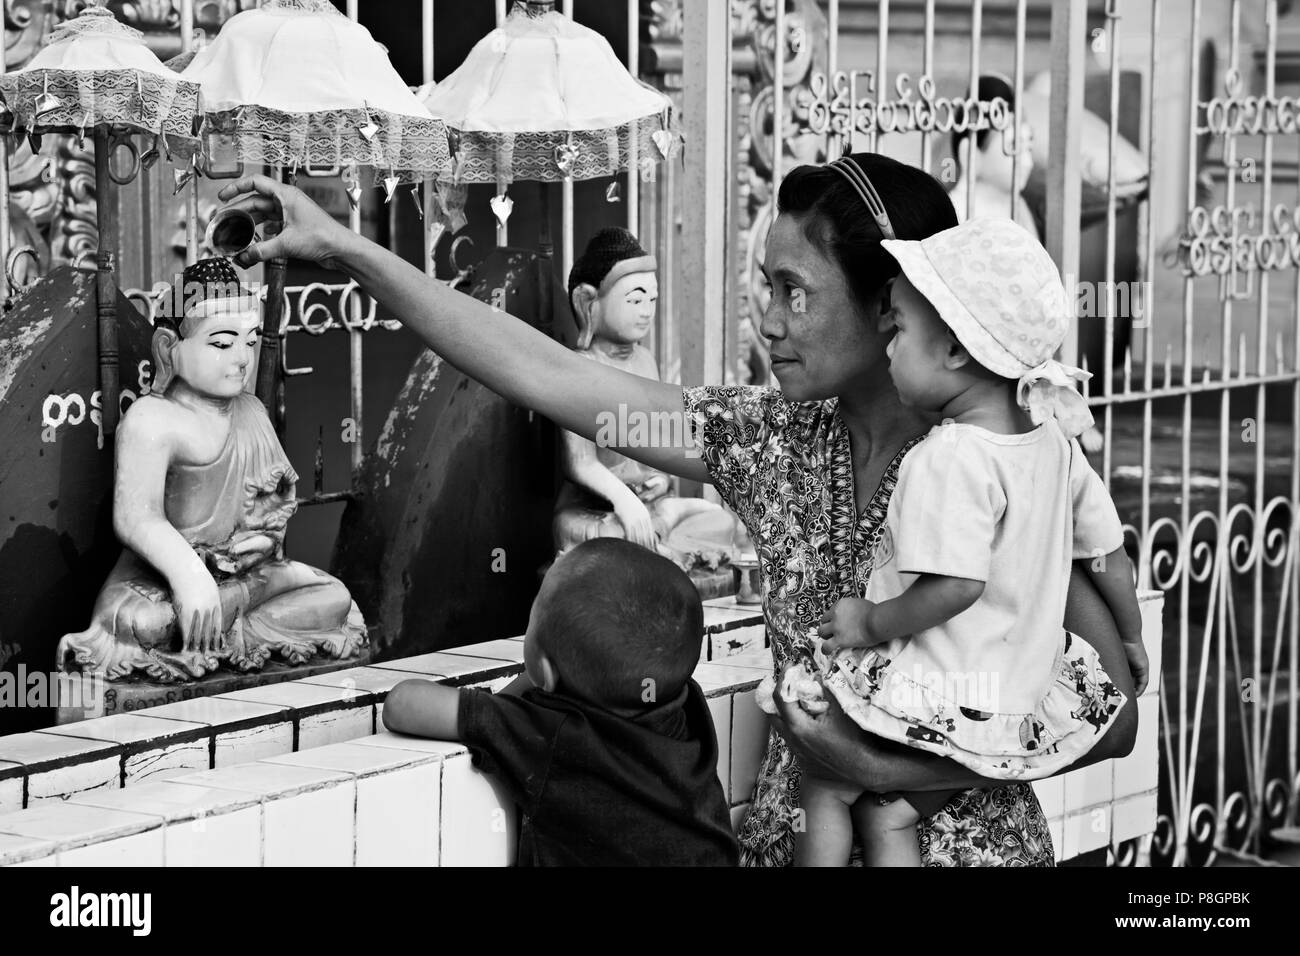 Making water offerings at a BUDDHIST TEMPLE in the town of PYIN U LWIN also known as MAYMYO - MYANMAR Stock Photo